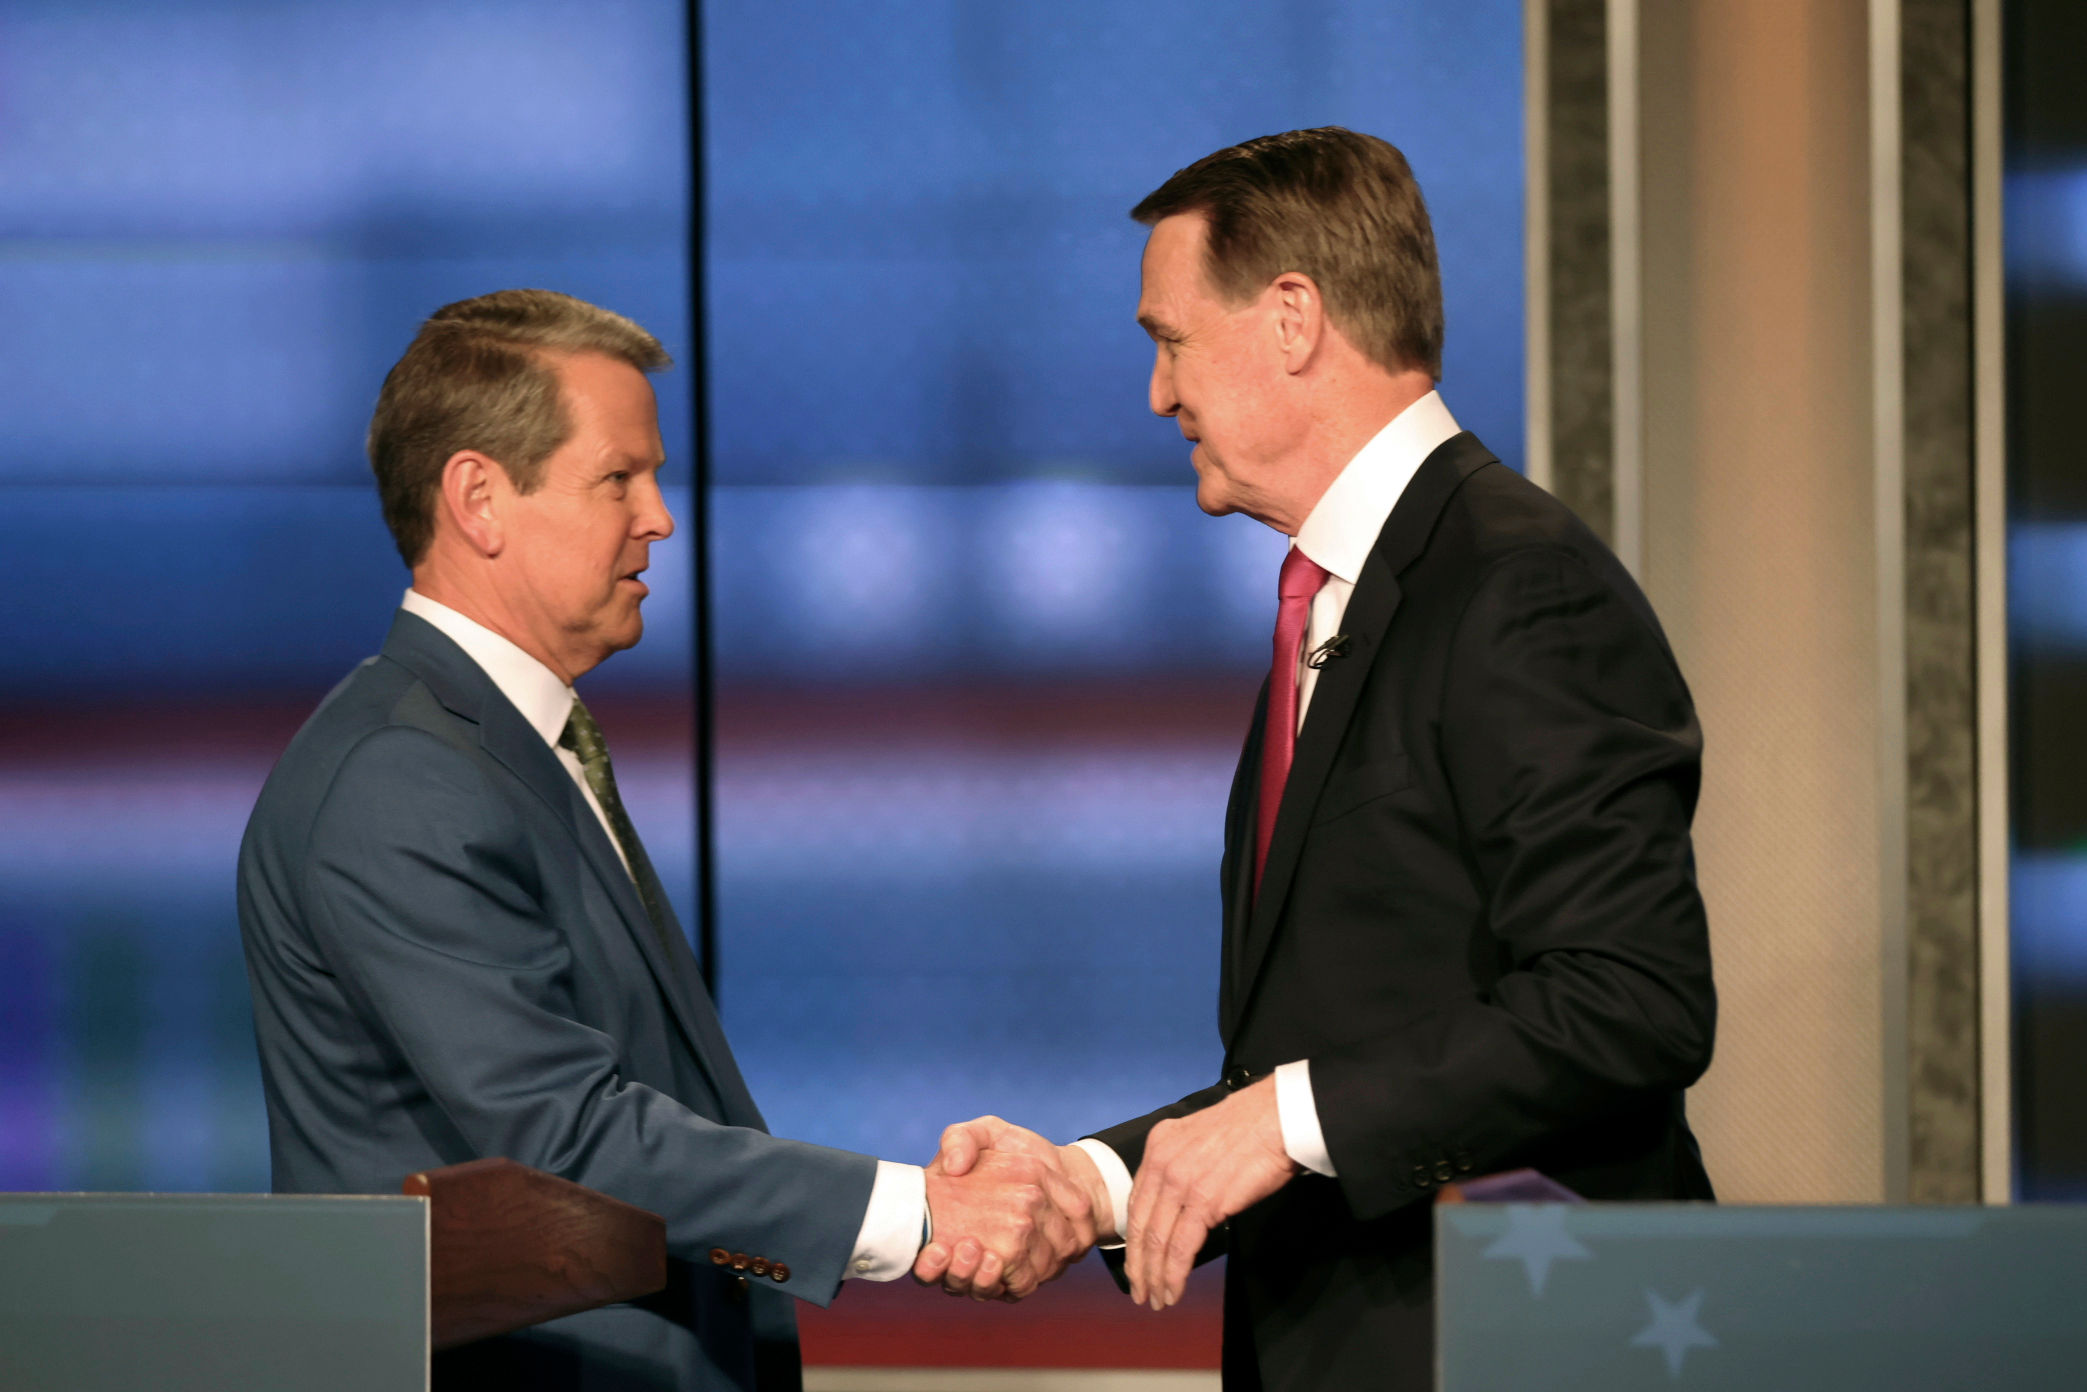 Georgia’s Kemp and Perdue bicker over elections in governor’s debate